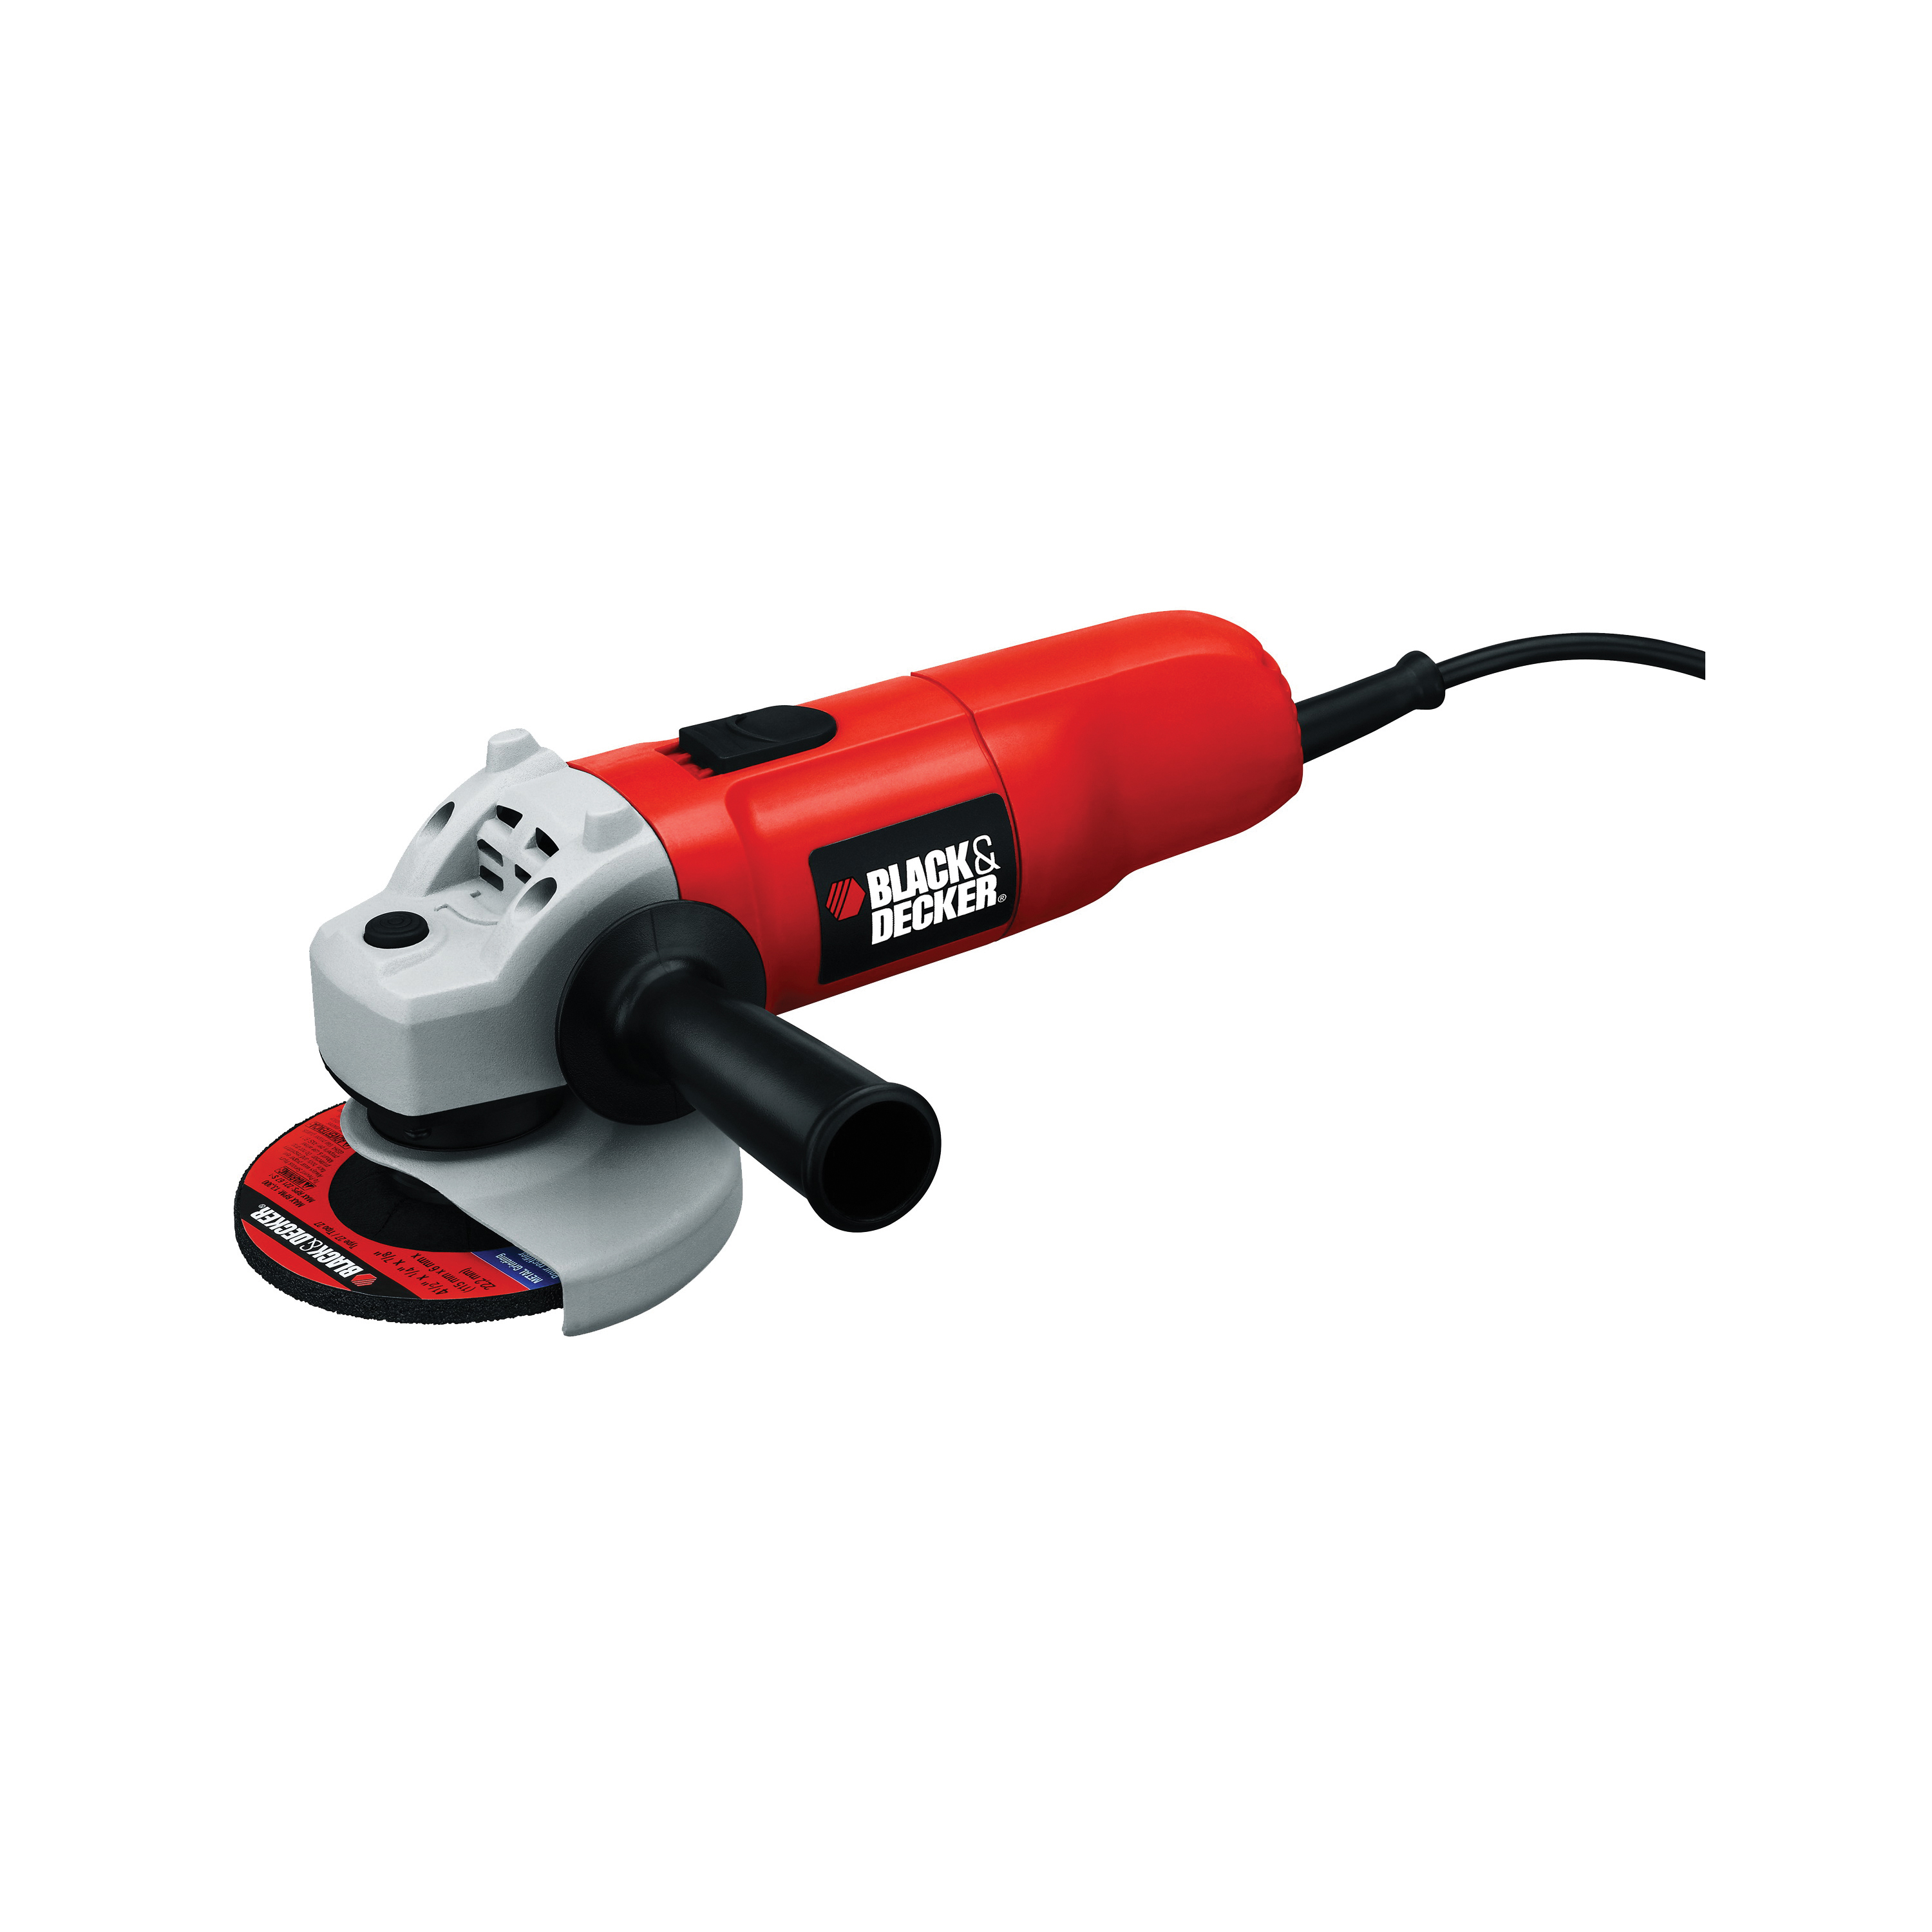 7750 Angle Grinder, 5.5 A, 5/8-11 Spindle, 4-1/2 in Dia Wheel, 10,000 rpm Speed